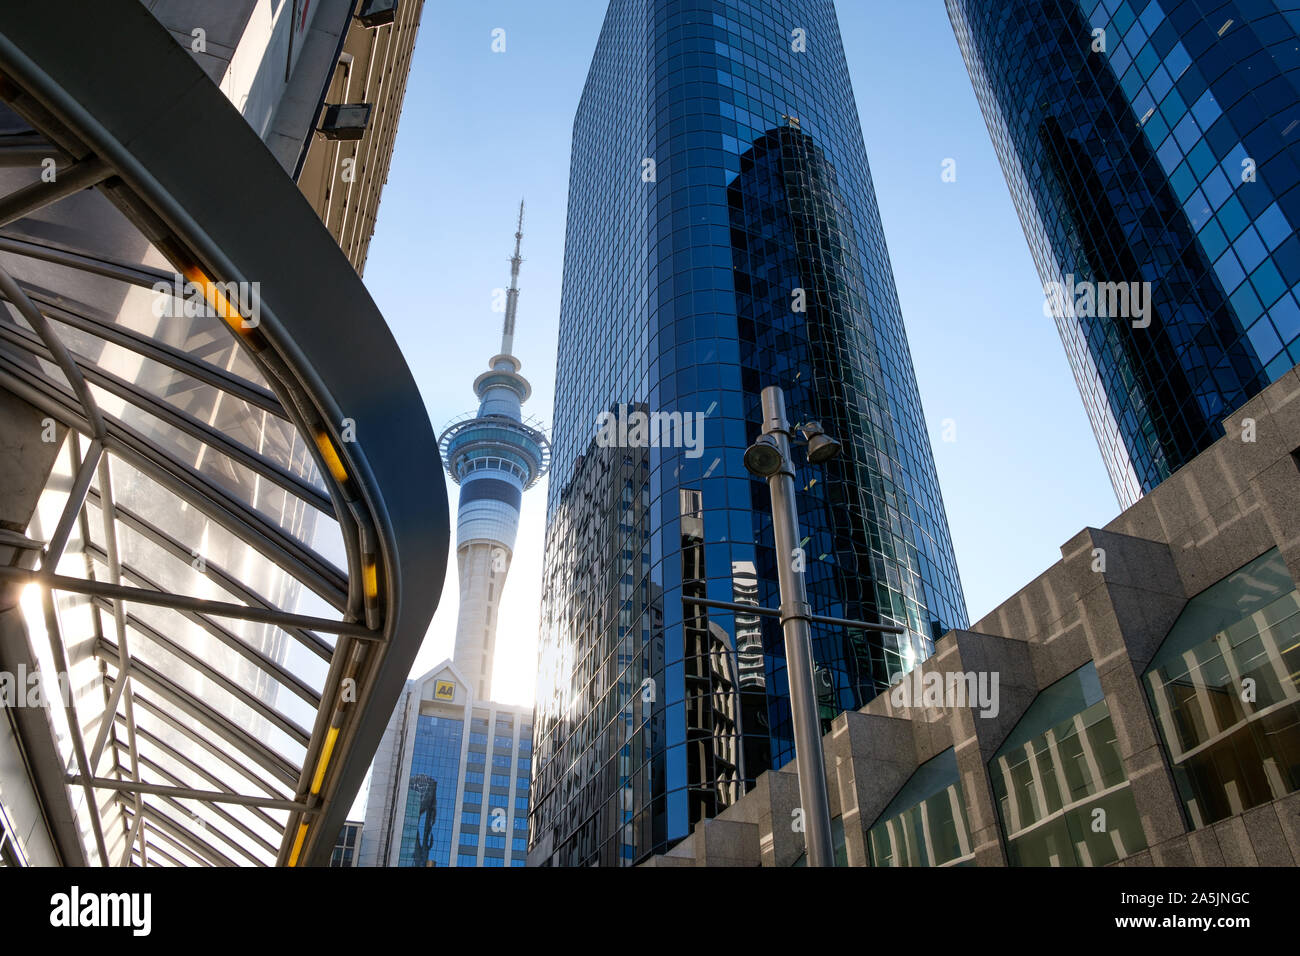 Auckland, New Zealand - April 15, 2019: Central Business District in Auckland. Sky Tower between skyscrapers. Stock Photo